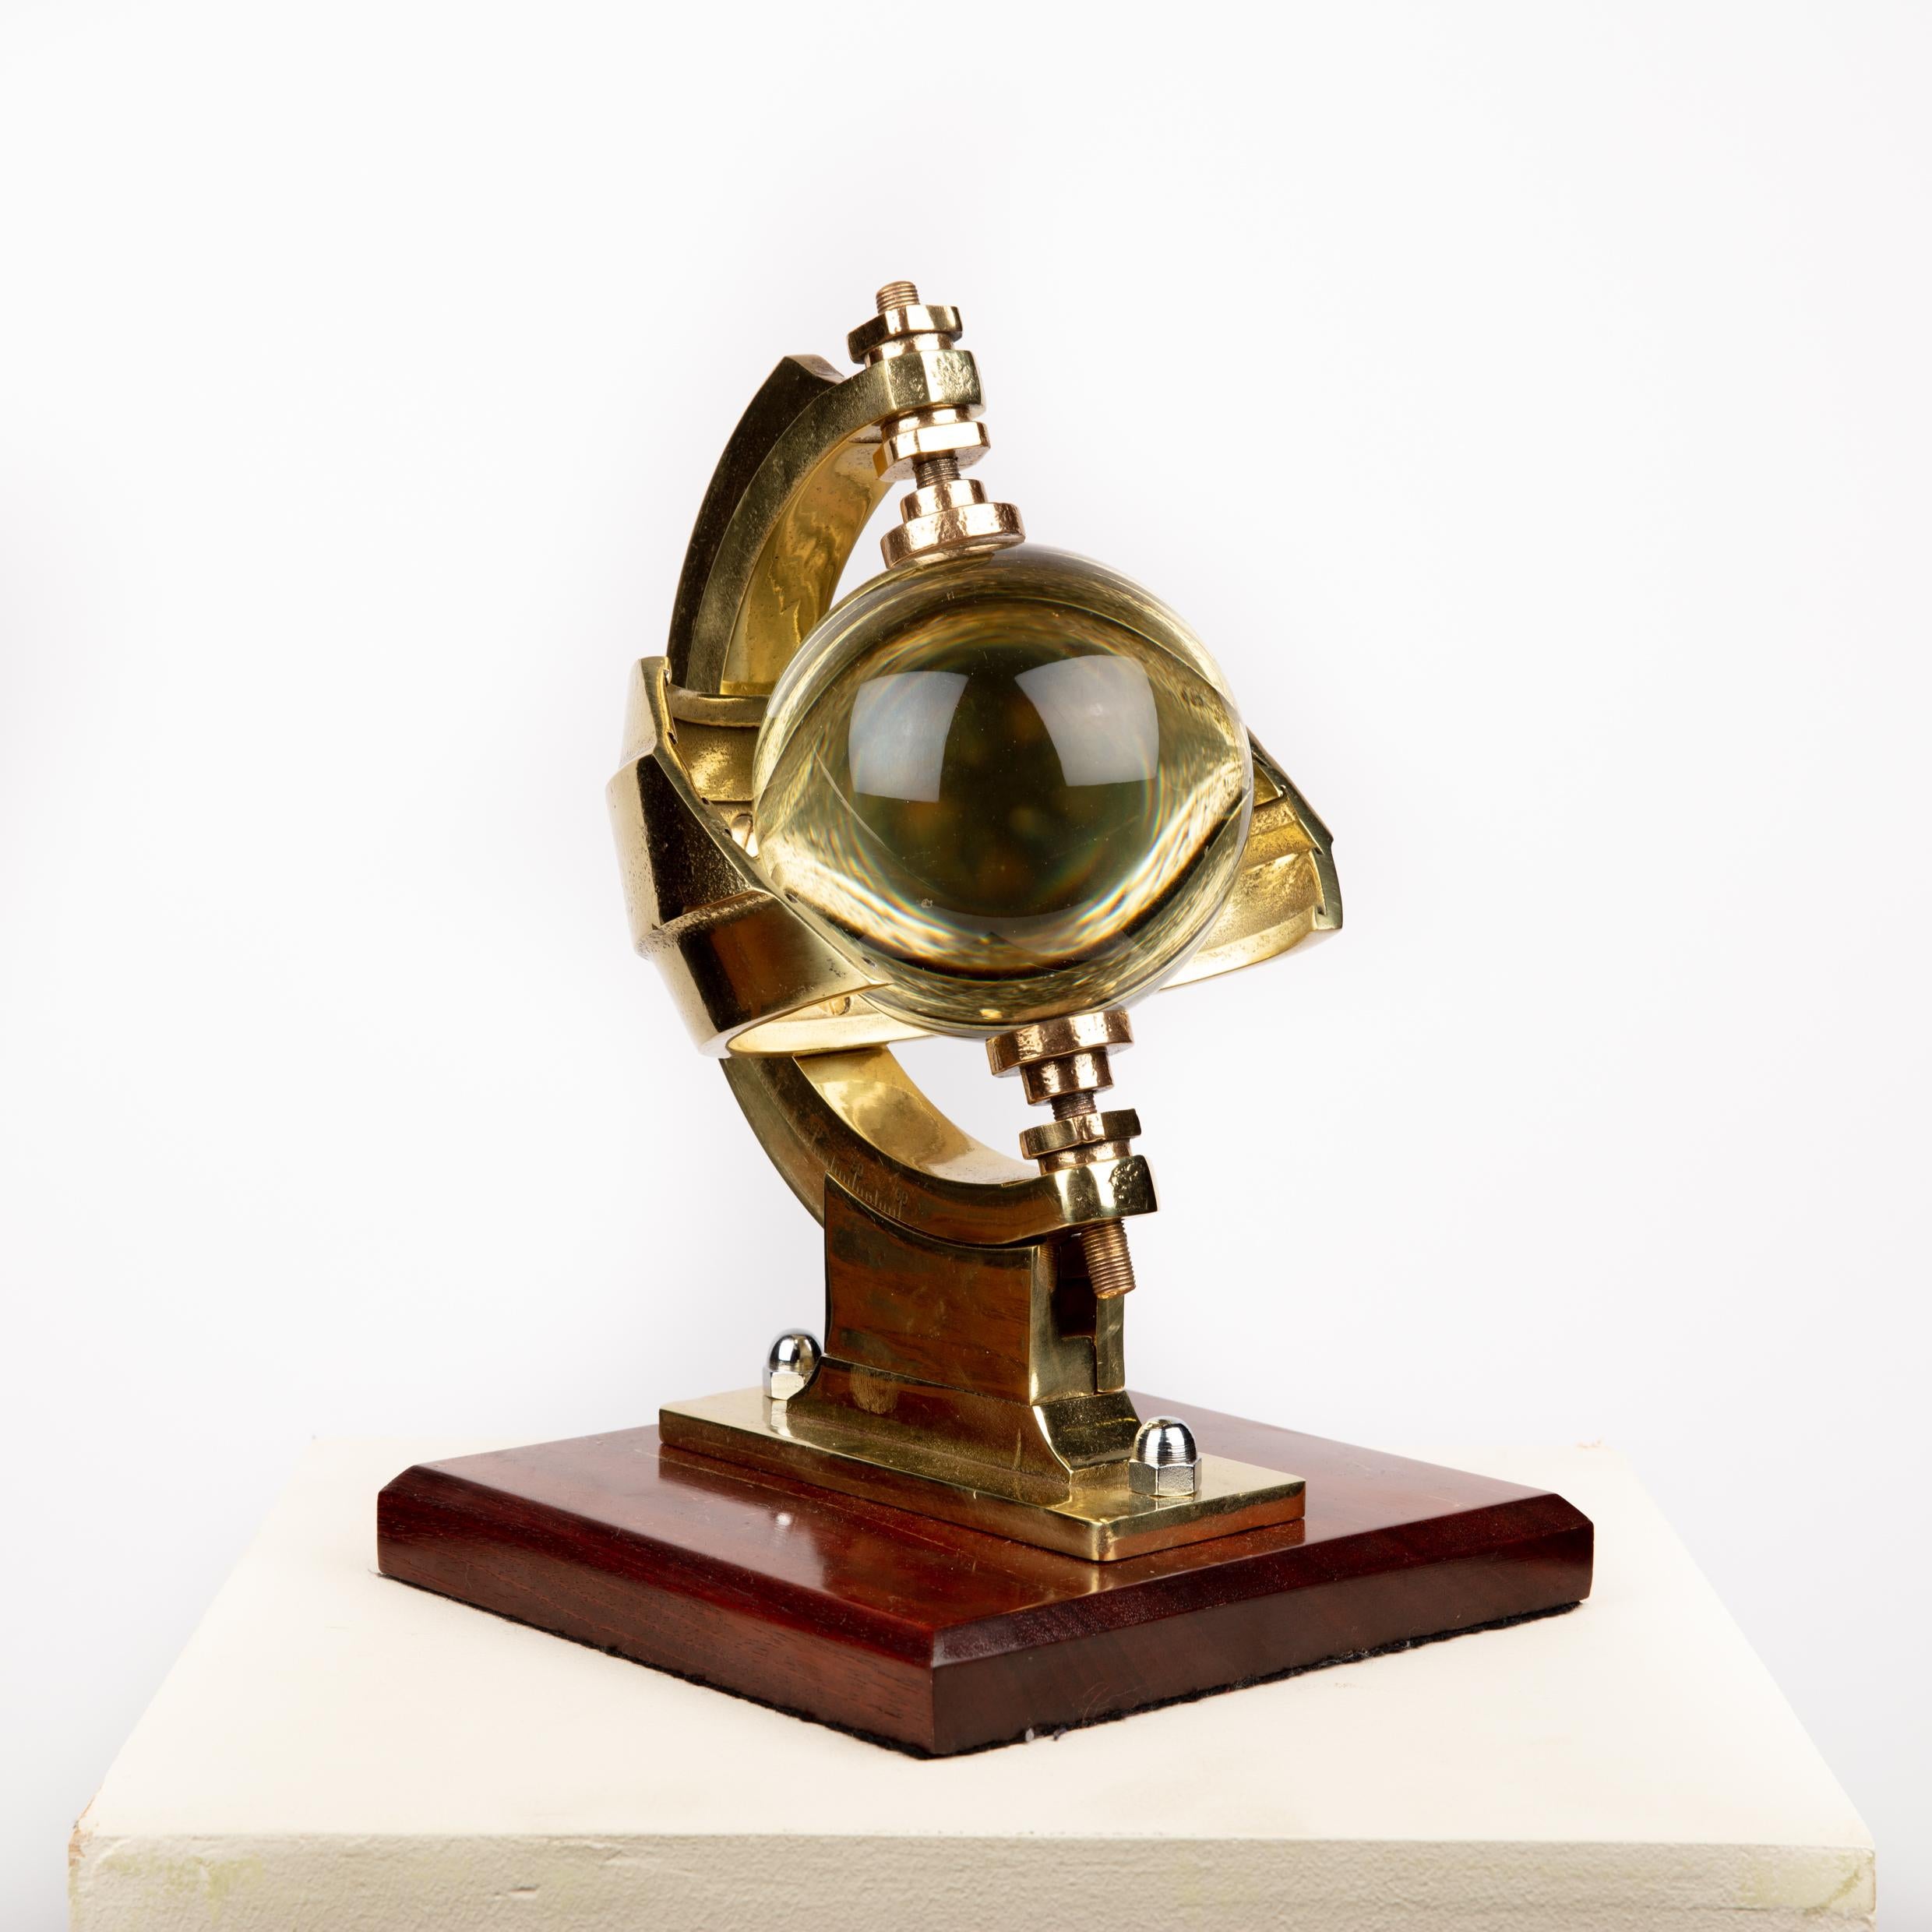 A Campbell–Stokes sunshine recorder, attributed to Casella & Co, circa 1910.
 
Mounted on a later wooden display plinth.

Marked with serial number to base: 1852.

The Campbell–Stokes sphere is used to record sunshine. It was invented by John